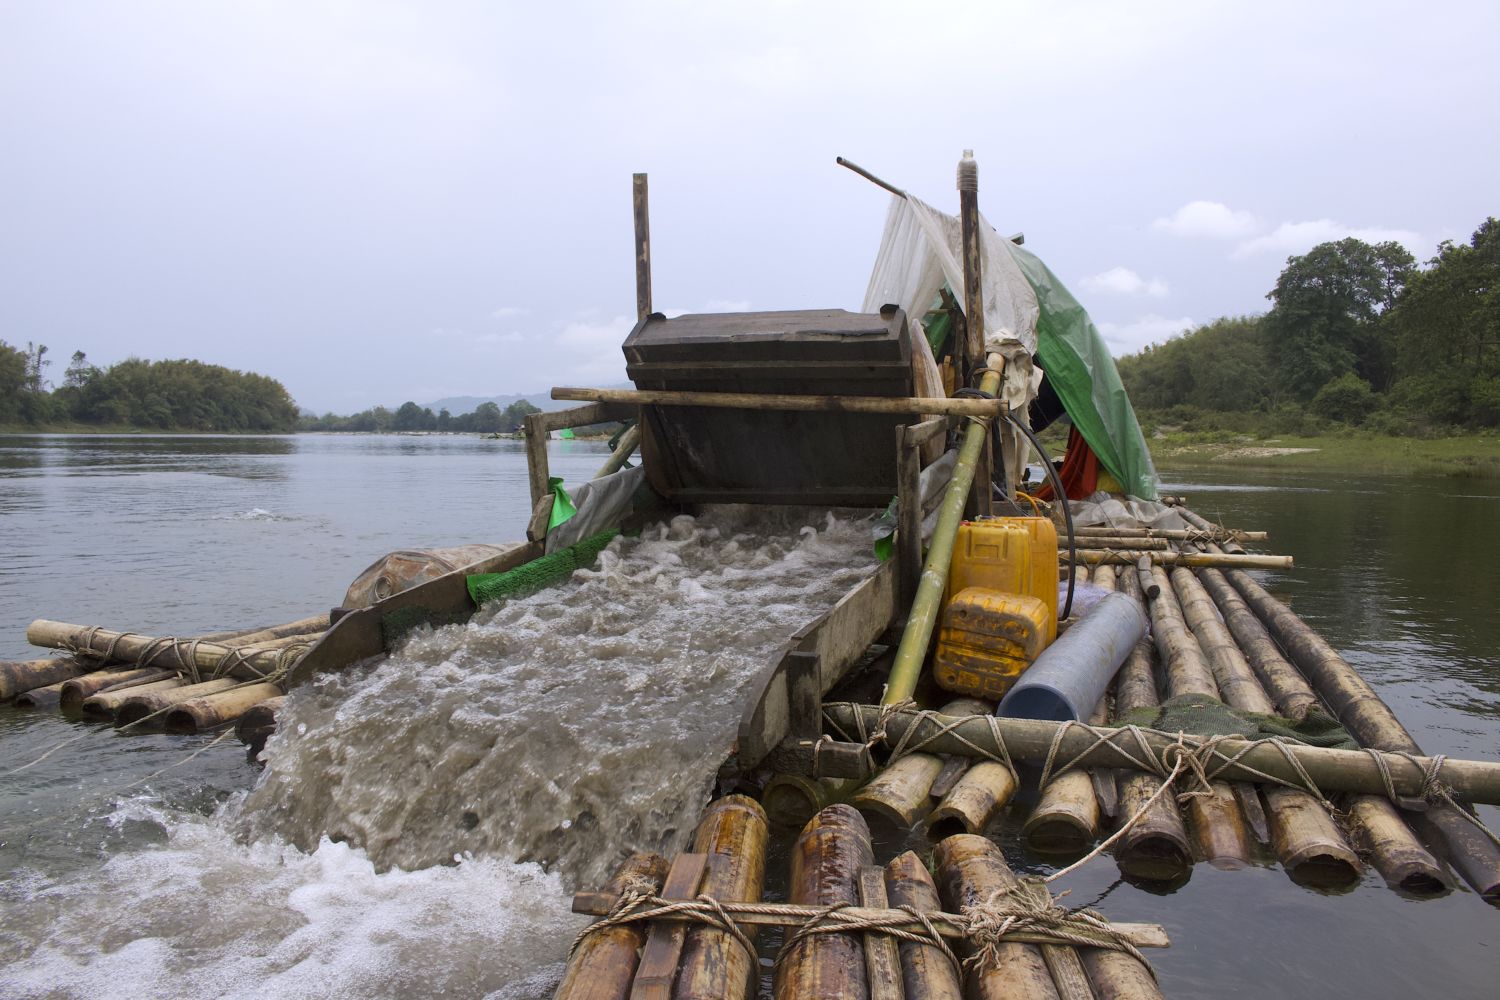 A mining vessel on the Mali River in Kachin State. Sediment suctioned from the river bottom passes through a sluice tray before mercury is added to extract gold.